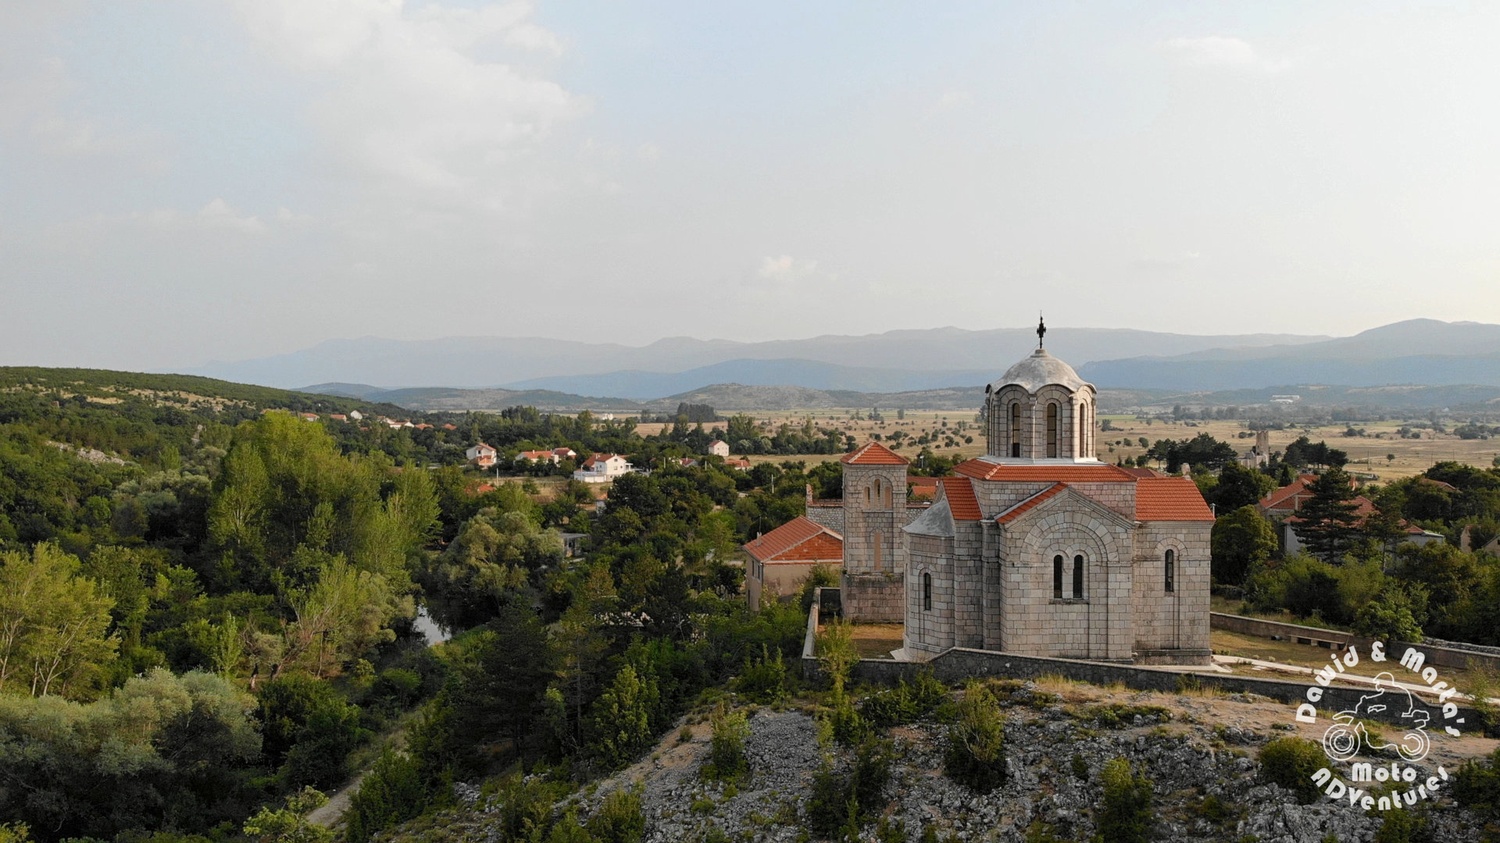 The orthodox church at the Cetina Rivers spring, inland Croatia